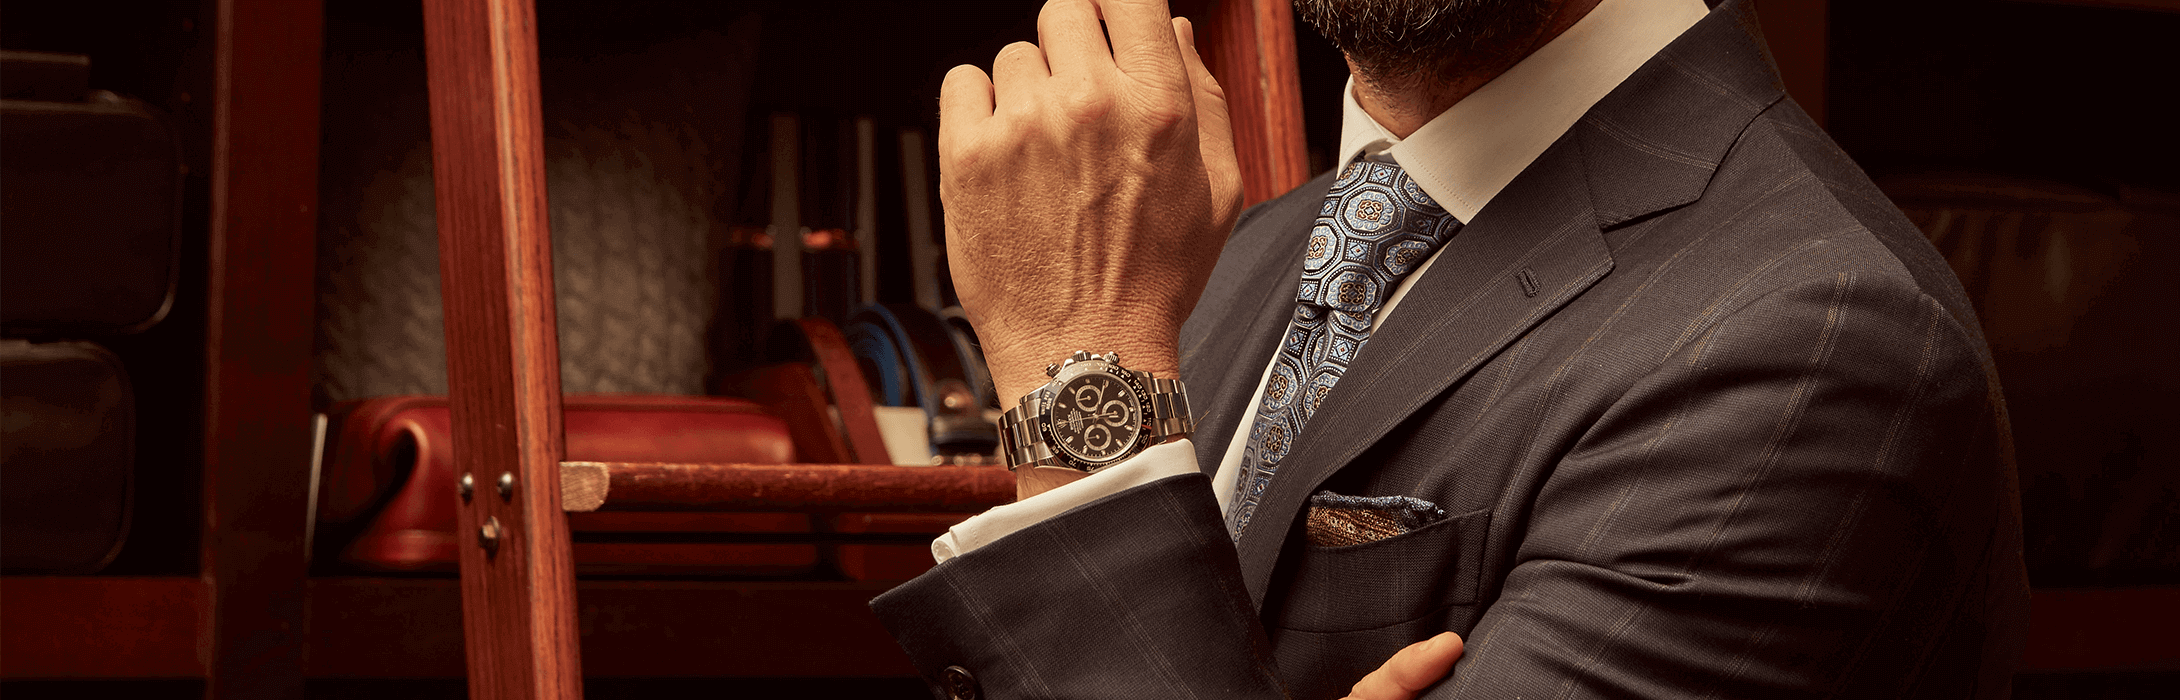 The best value investments: Clever watch investments - The watch magazine